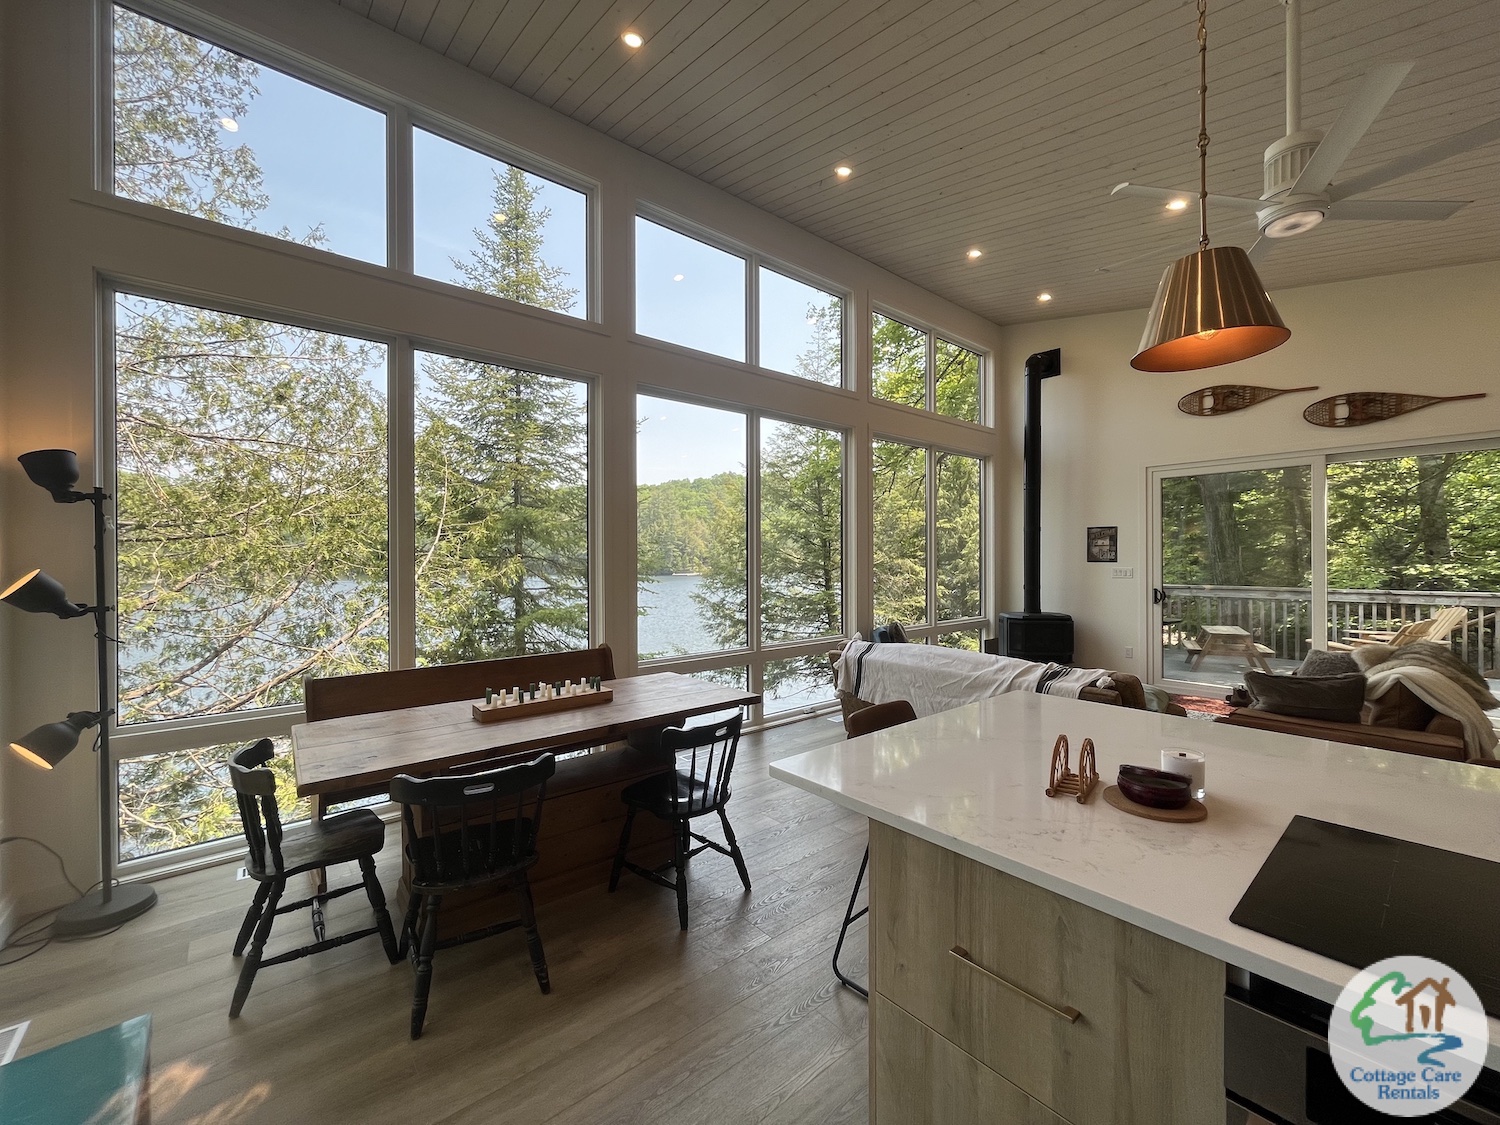 Miskwabi Lake By the Shore - Kitchen, Dining, and Living Rooms